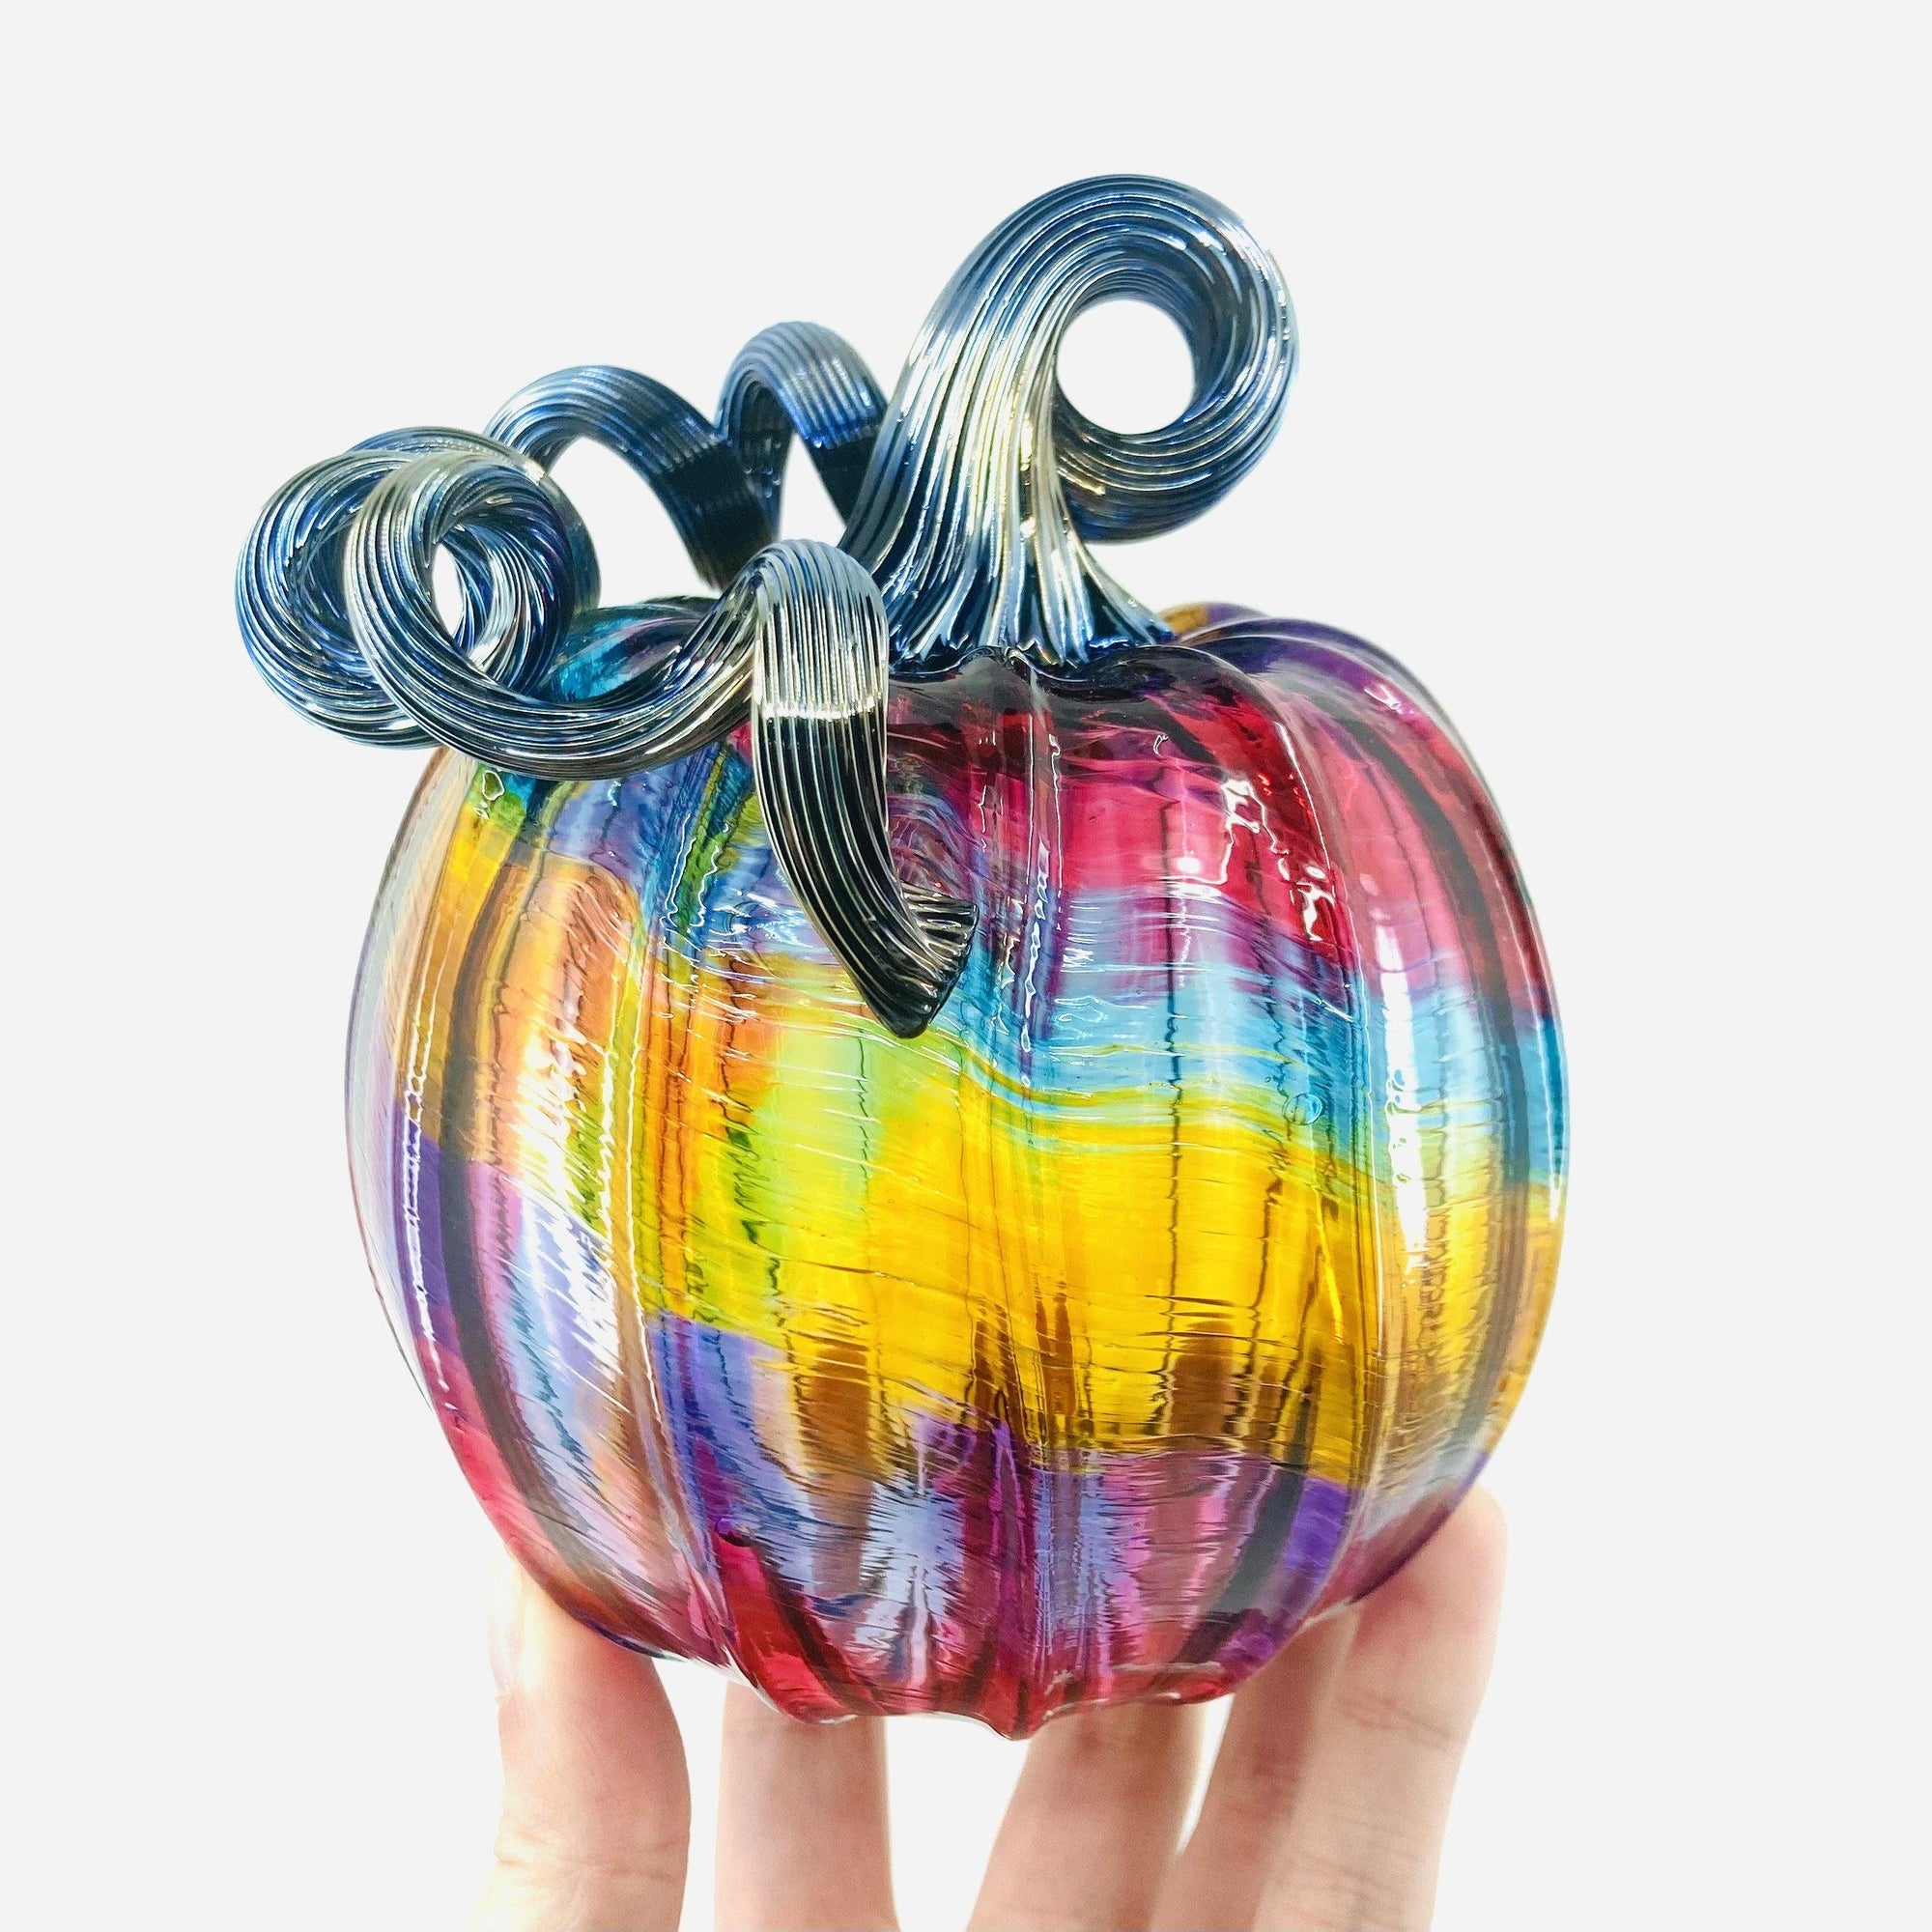 Glassblowing Gift Glass Blowing Supplies & Stuff Funny Glass Blowing Art  for Men Women Glassblower Tool Lover Throw Pillow, 16x16, Multicolor